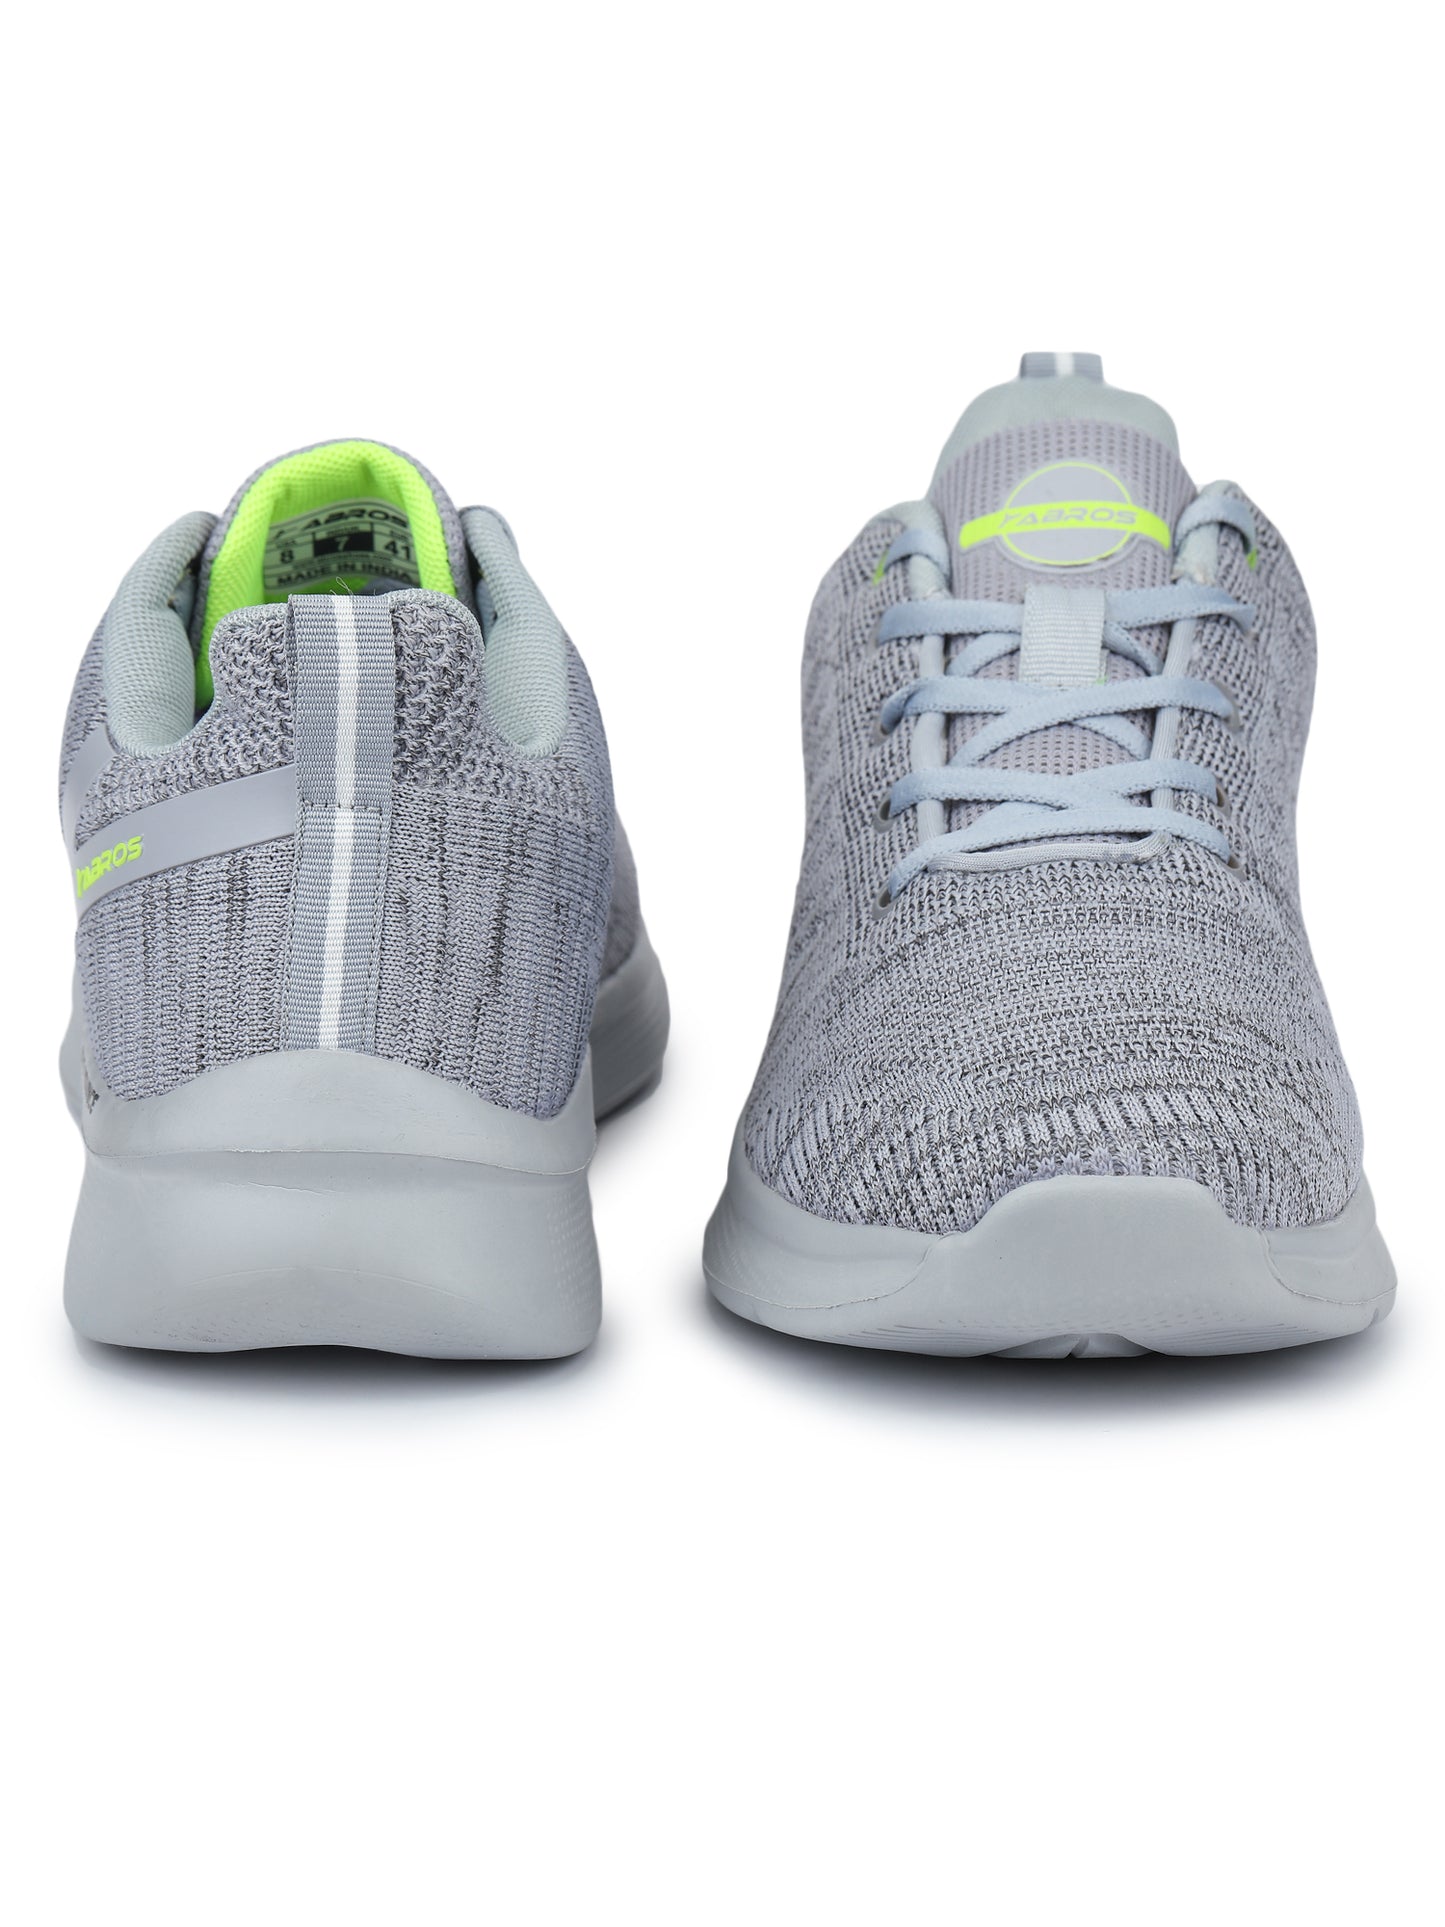 ABROS MAGNITE SPORTS SHOES FOR MEN